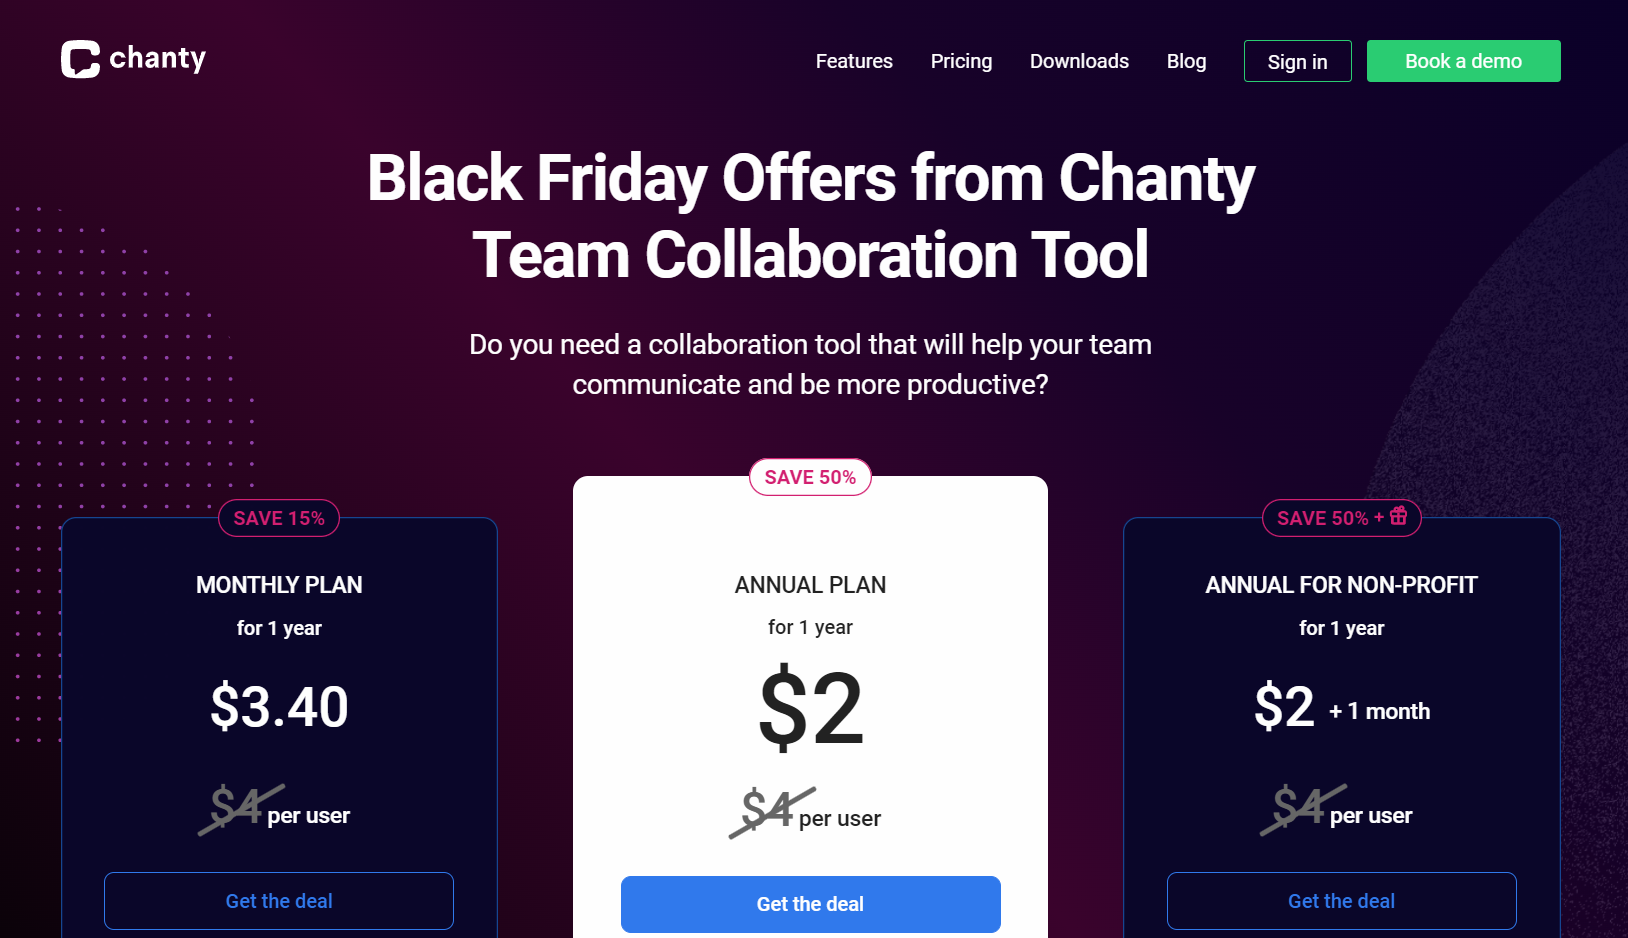 Get More for Less: Sweetest Black Friday 2021 SaaS Deals